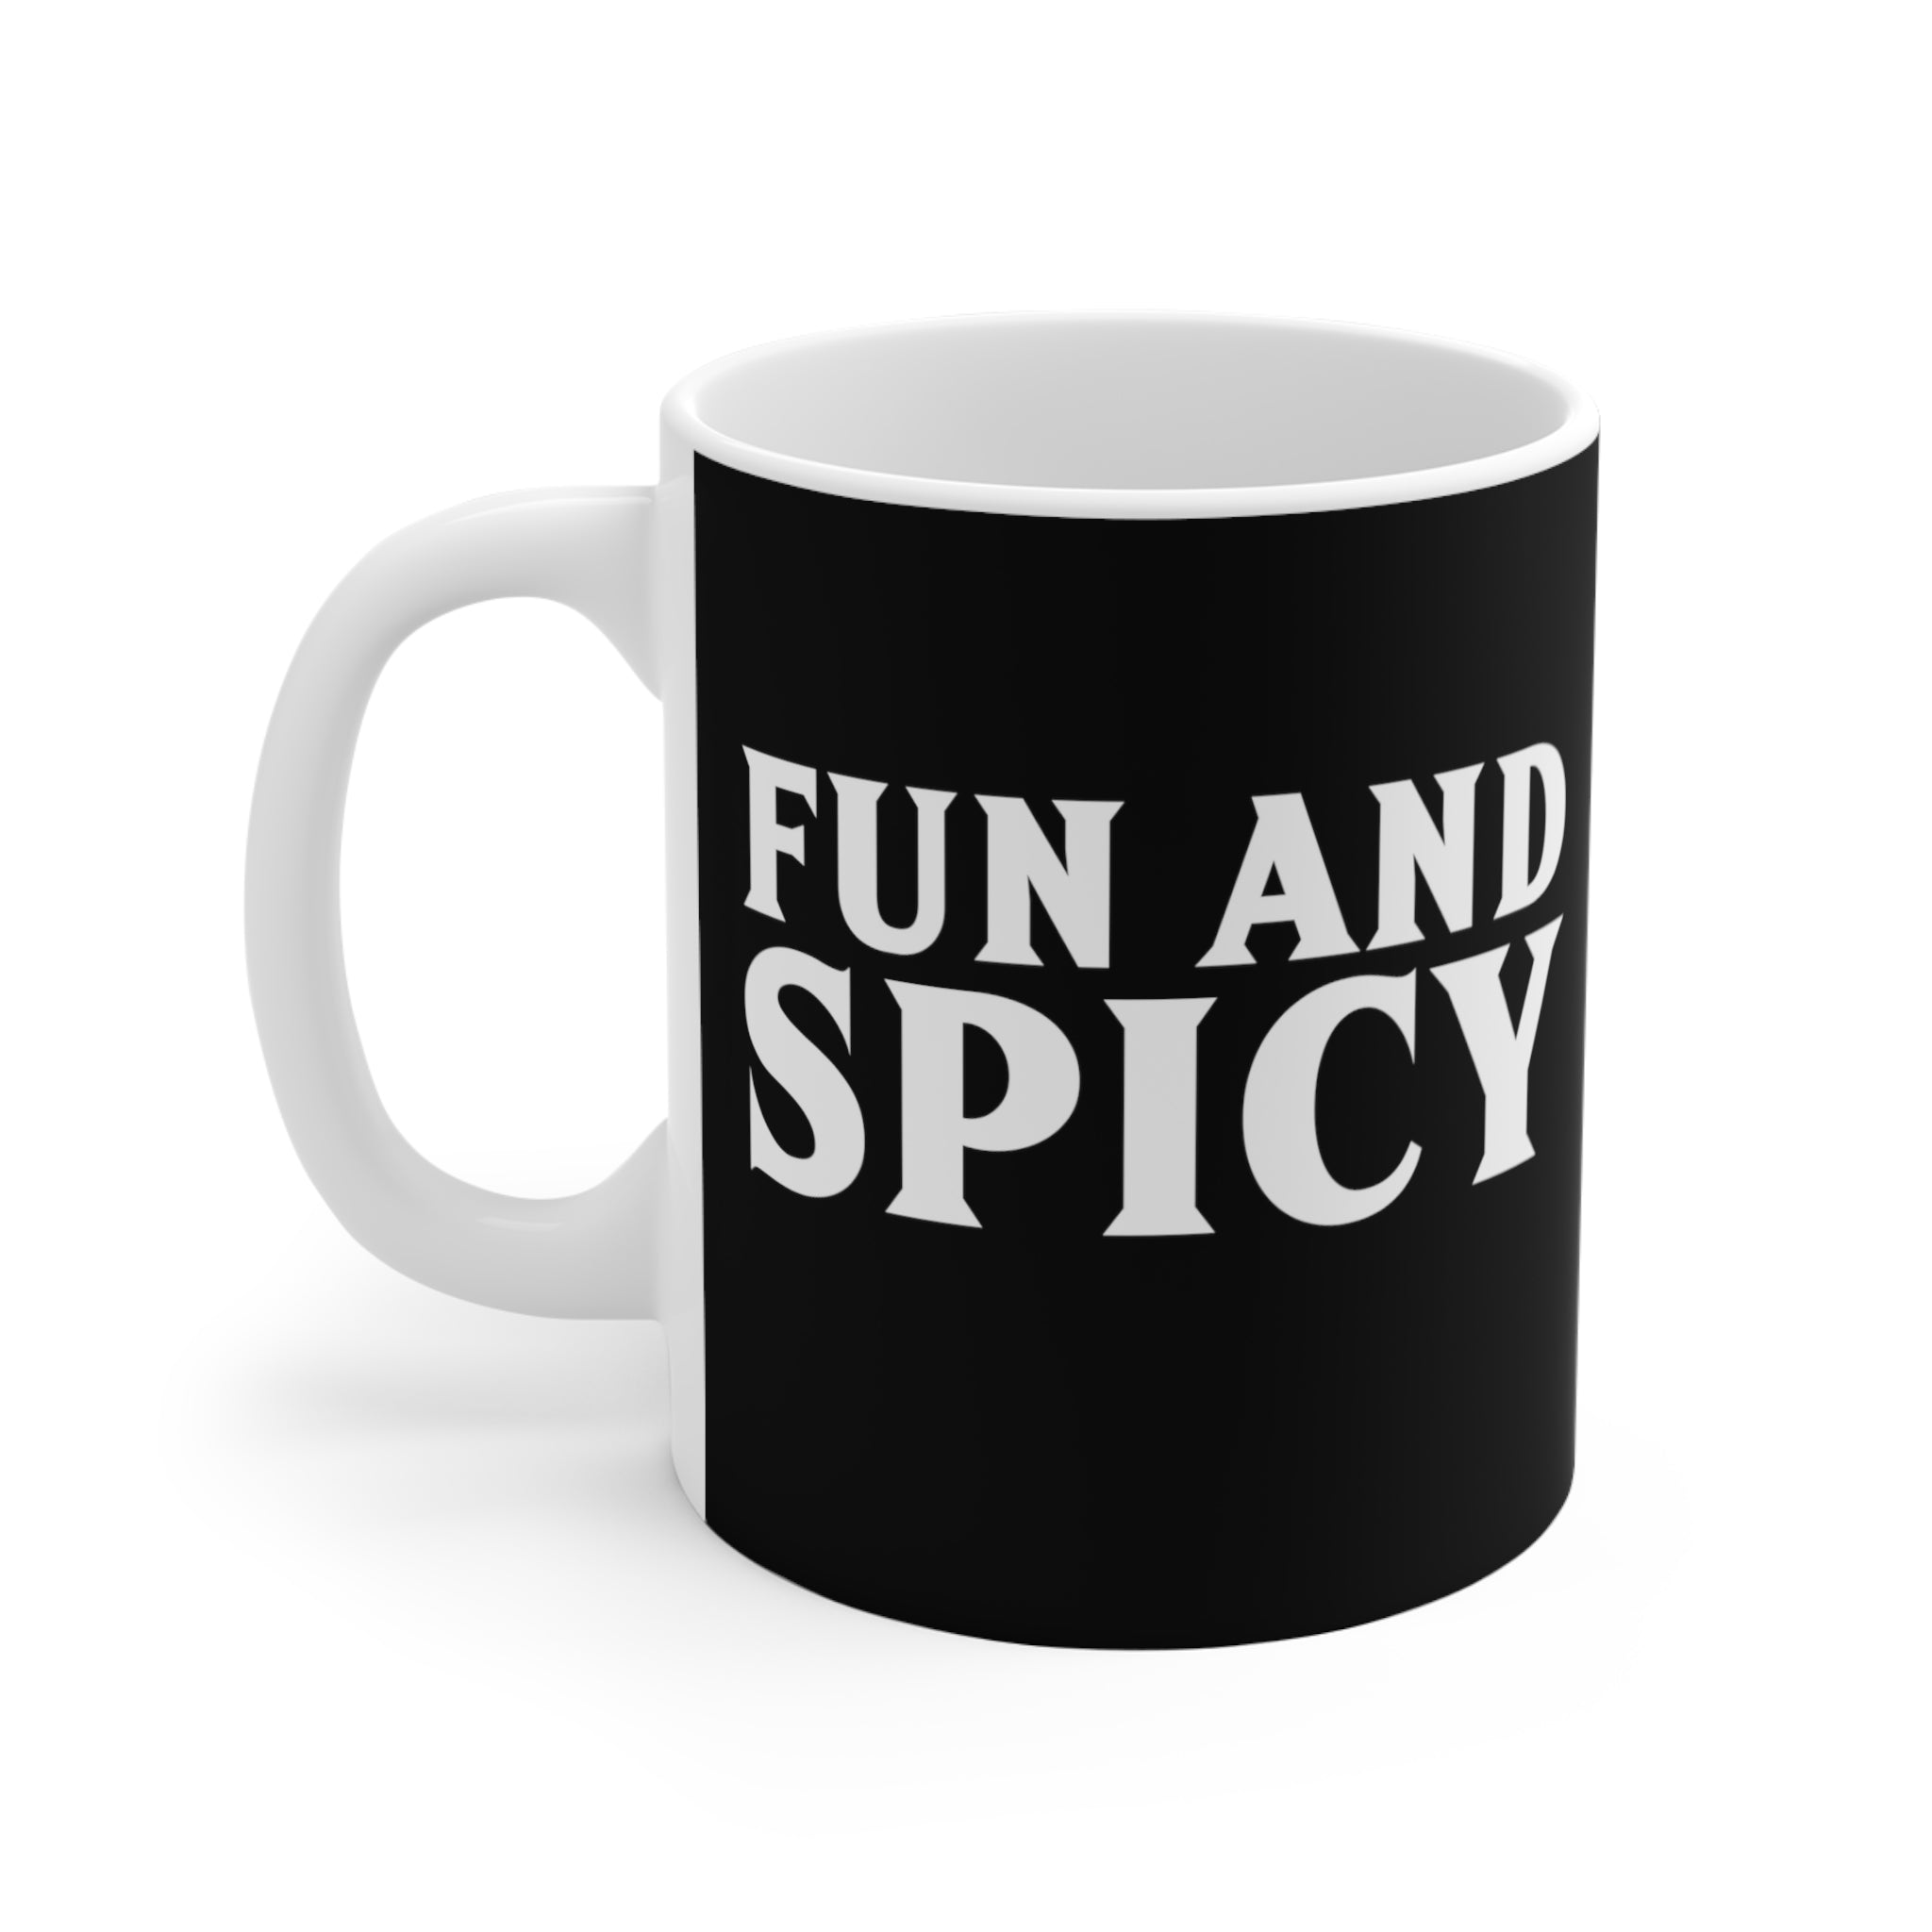 Fun and Spicy Ceramic Coffee Cup